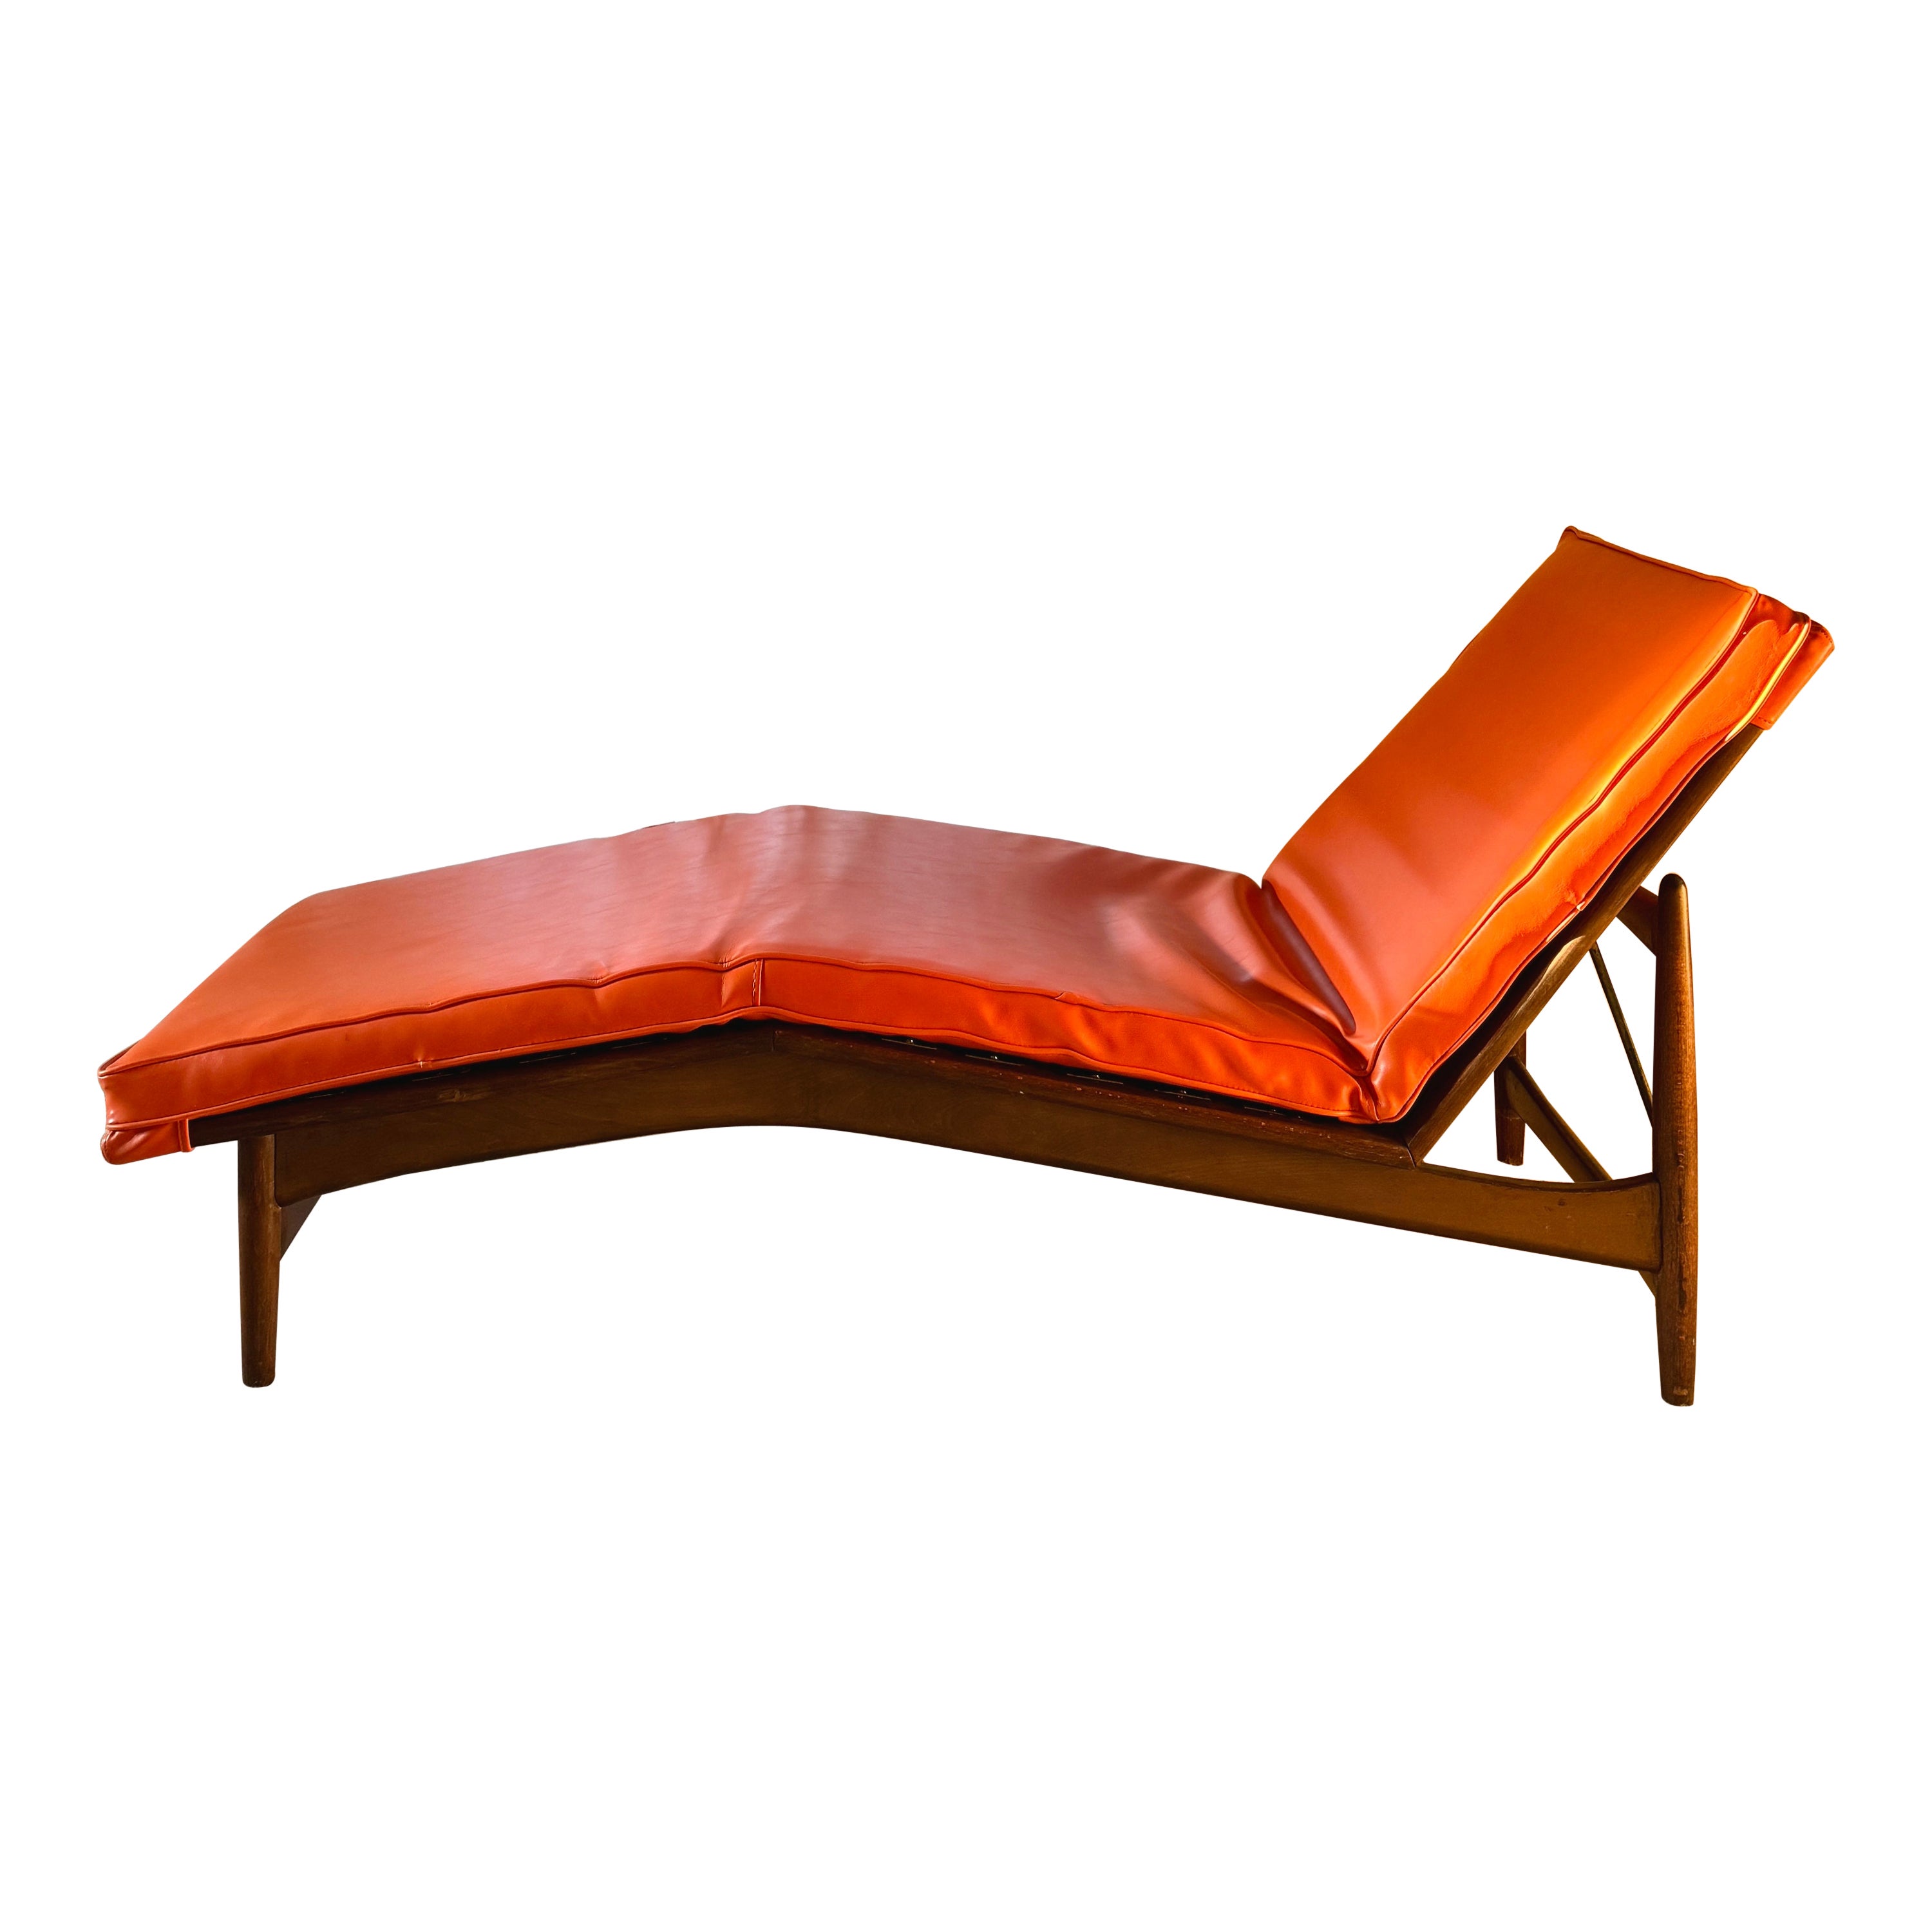 A beautiful mid century modern Danish lounge chair by Ib Kofod Larsen for Selig For Sale